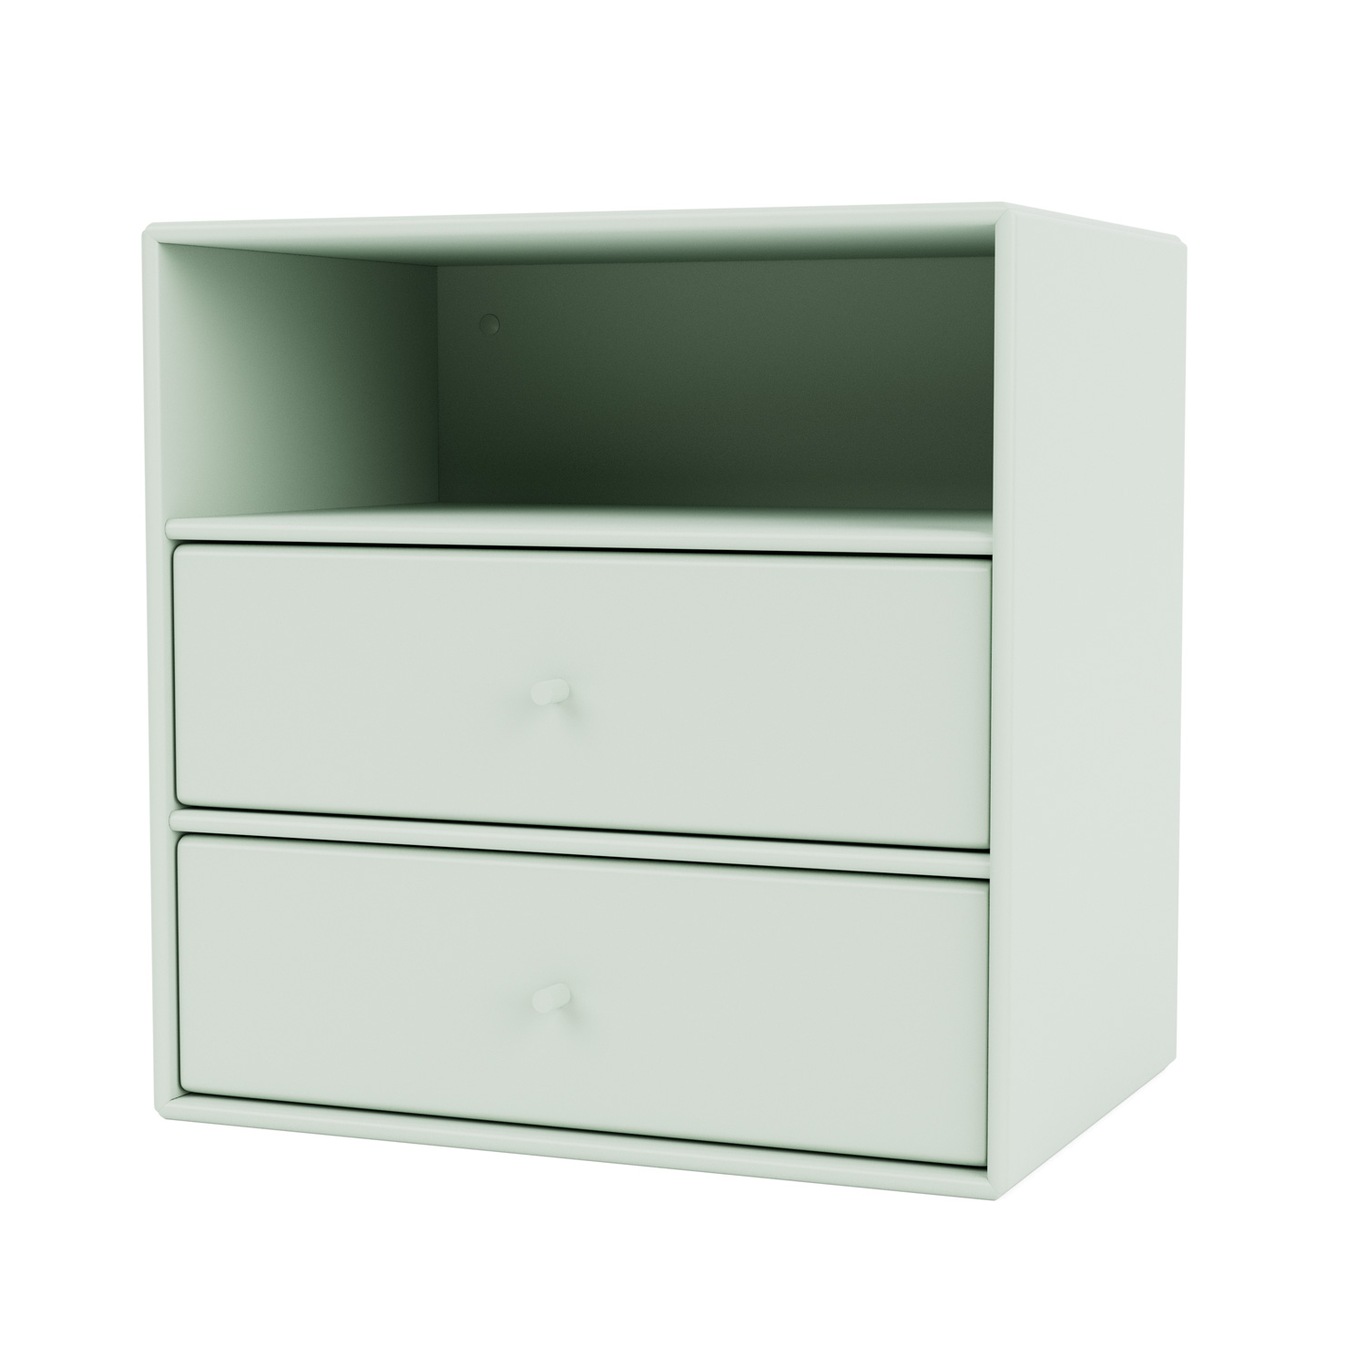 Mini 1006 Shelf With Two Drawers, Mist Green